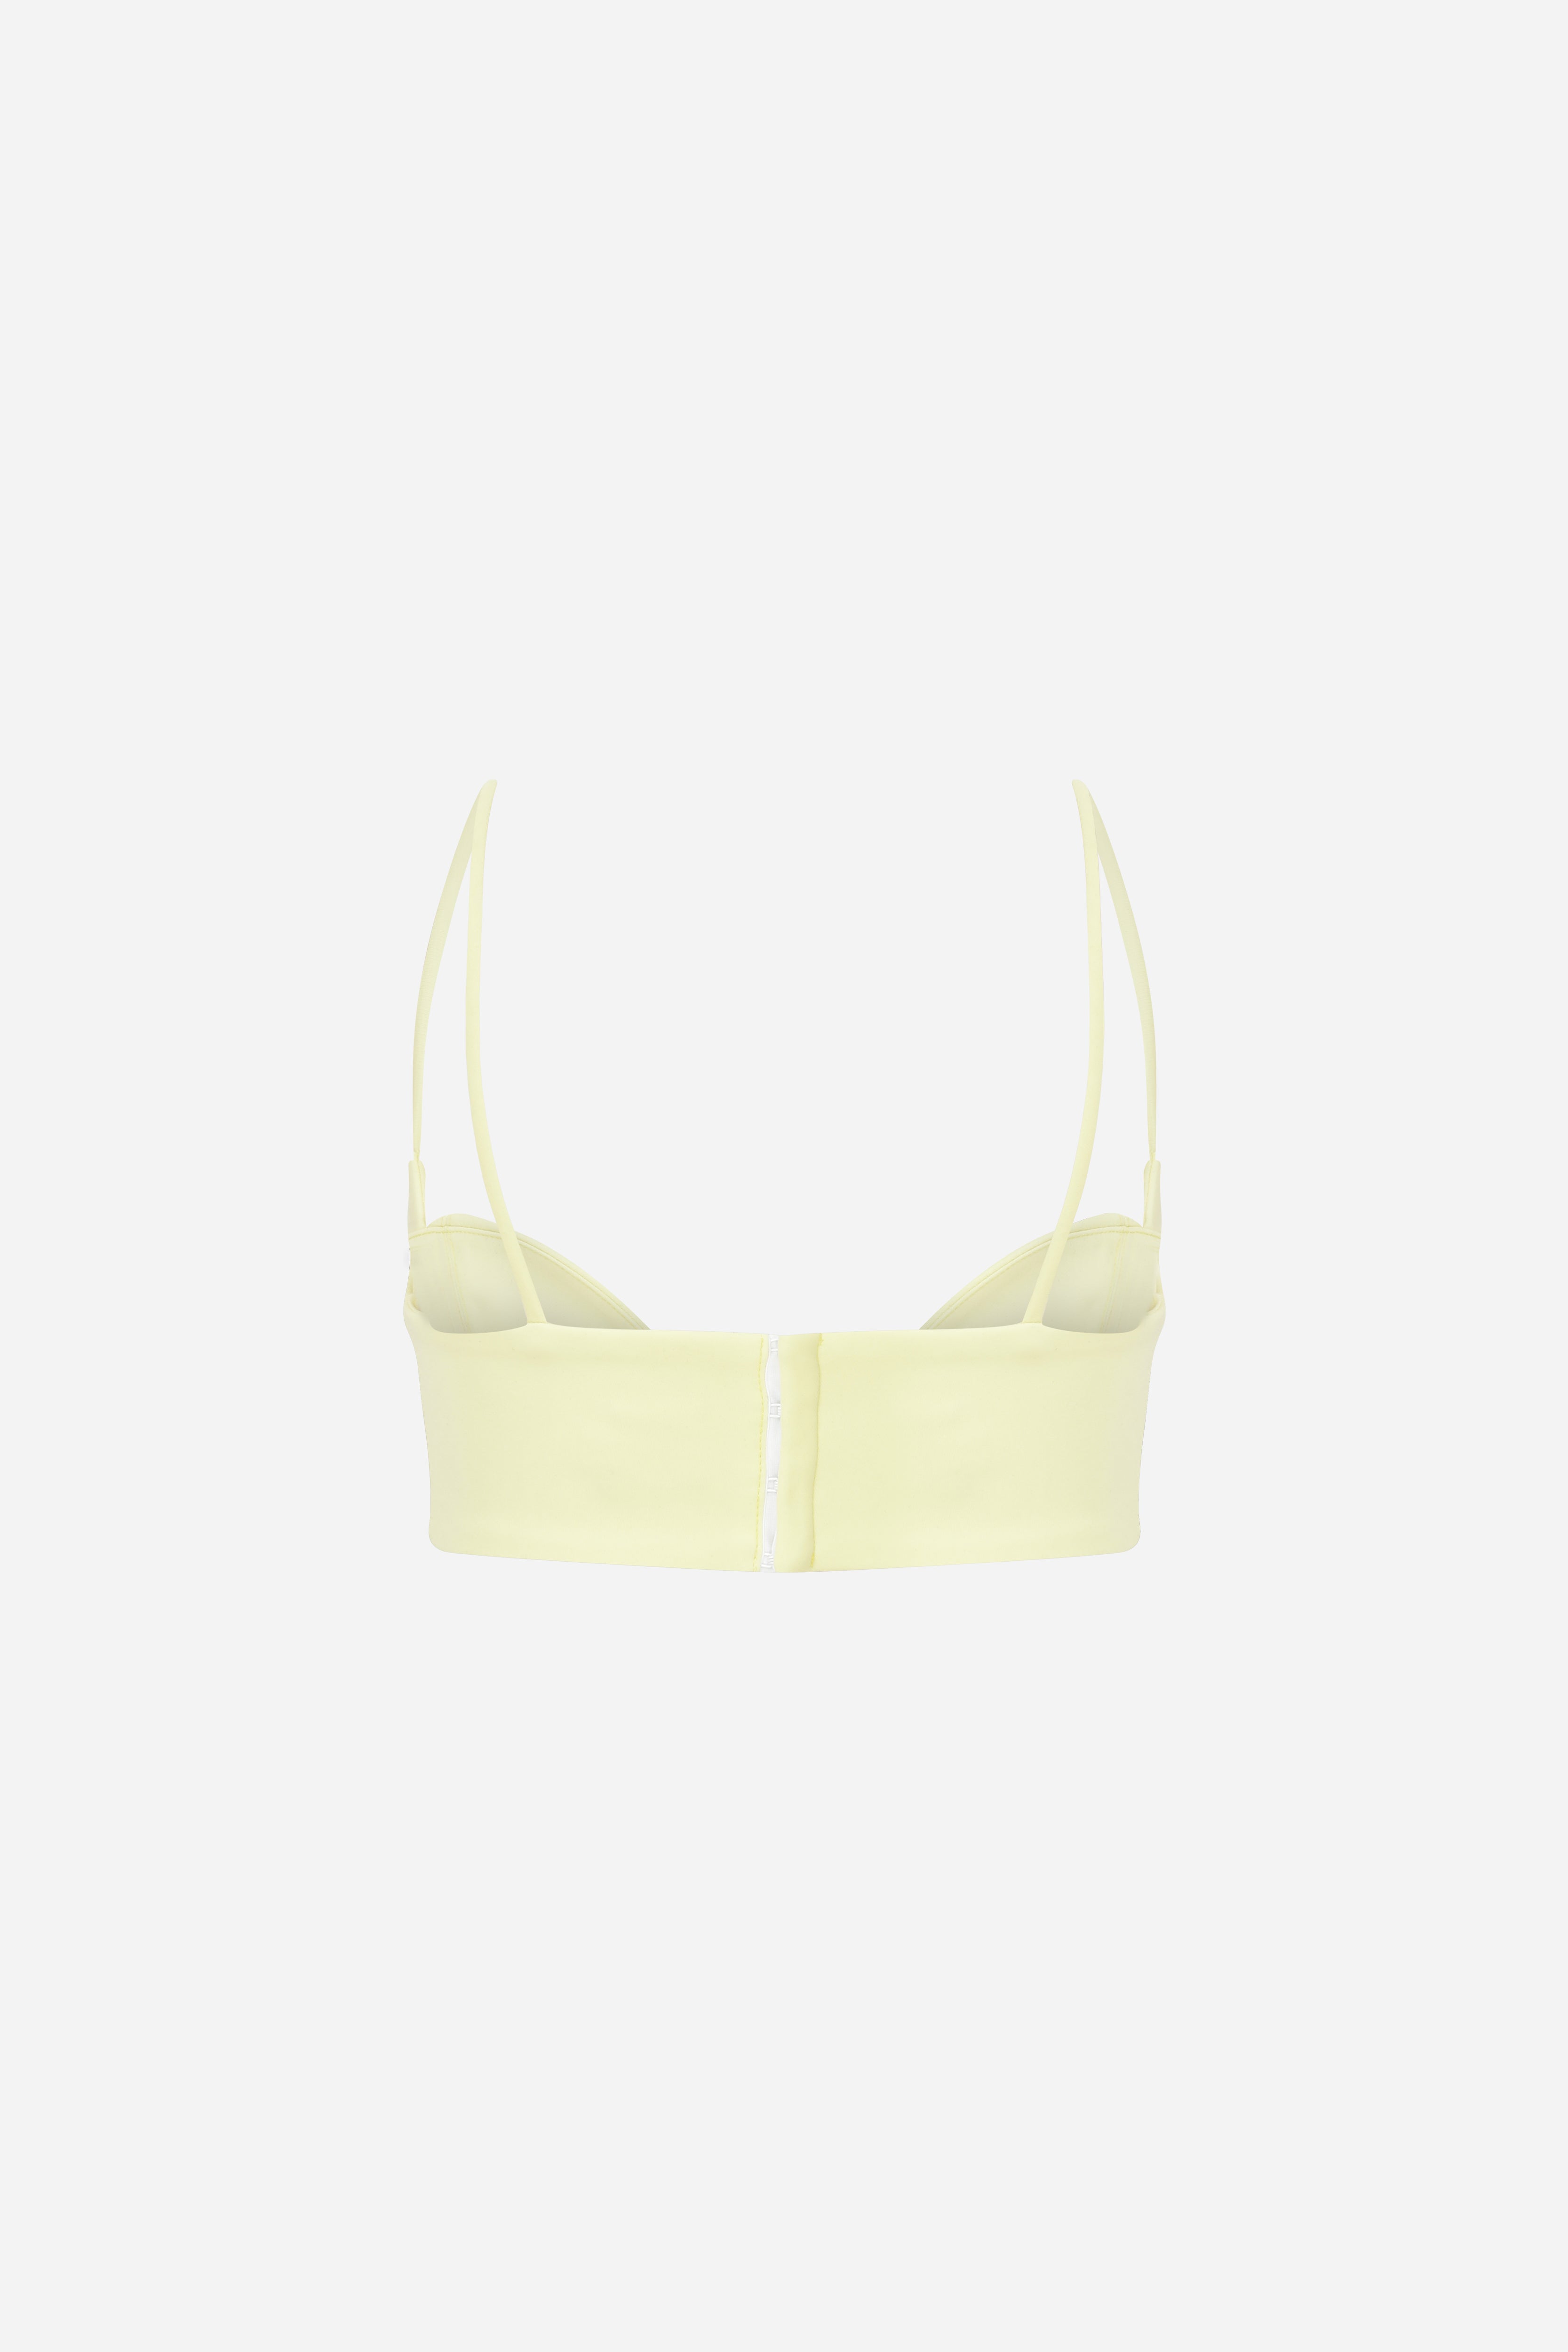 Mona - Dual Bra Top With Mirror Details